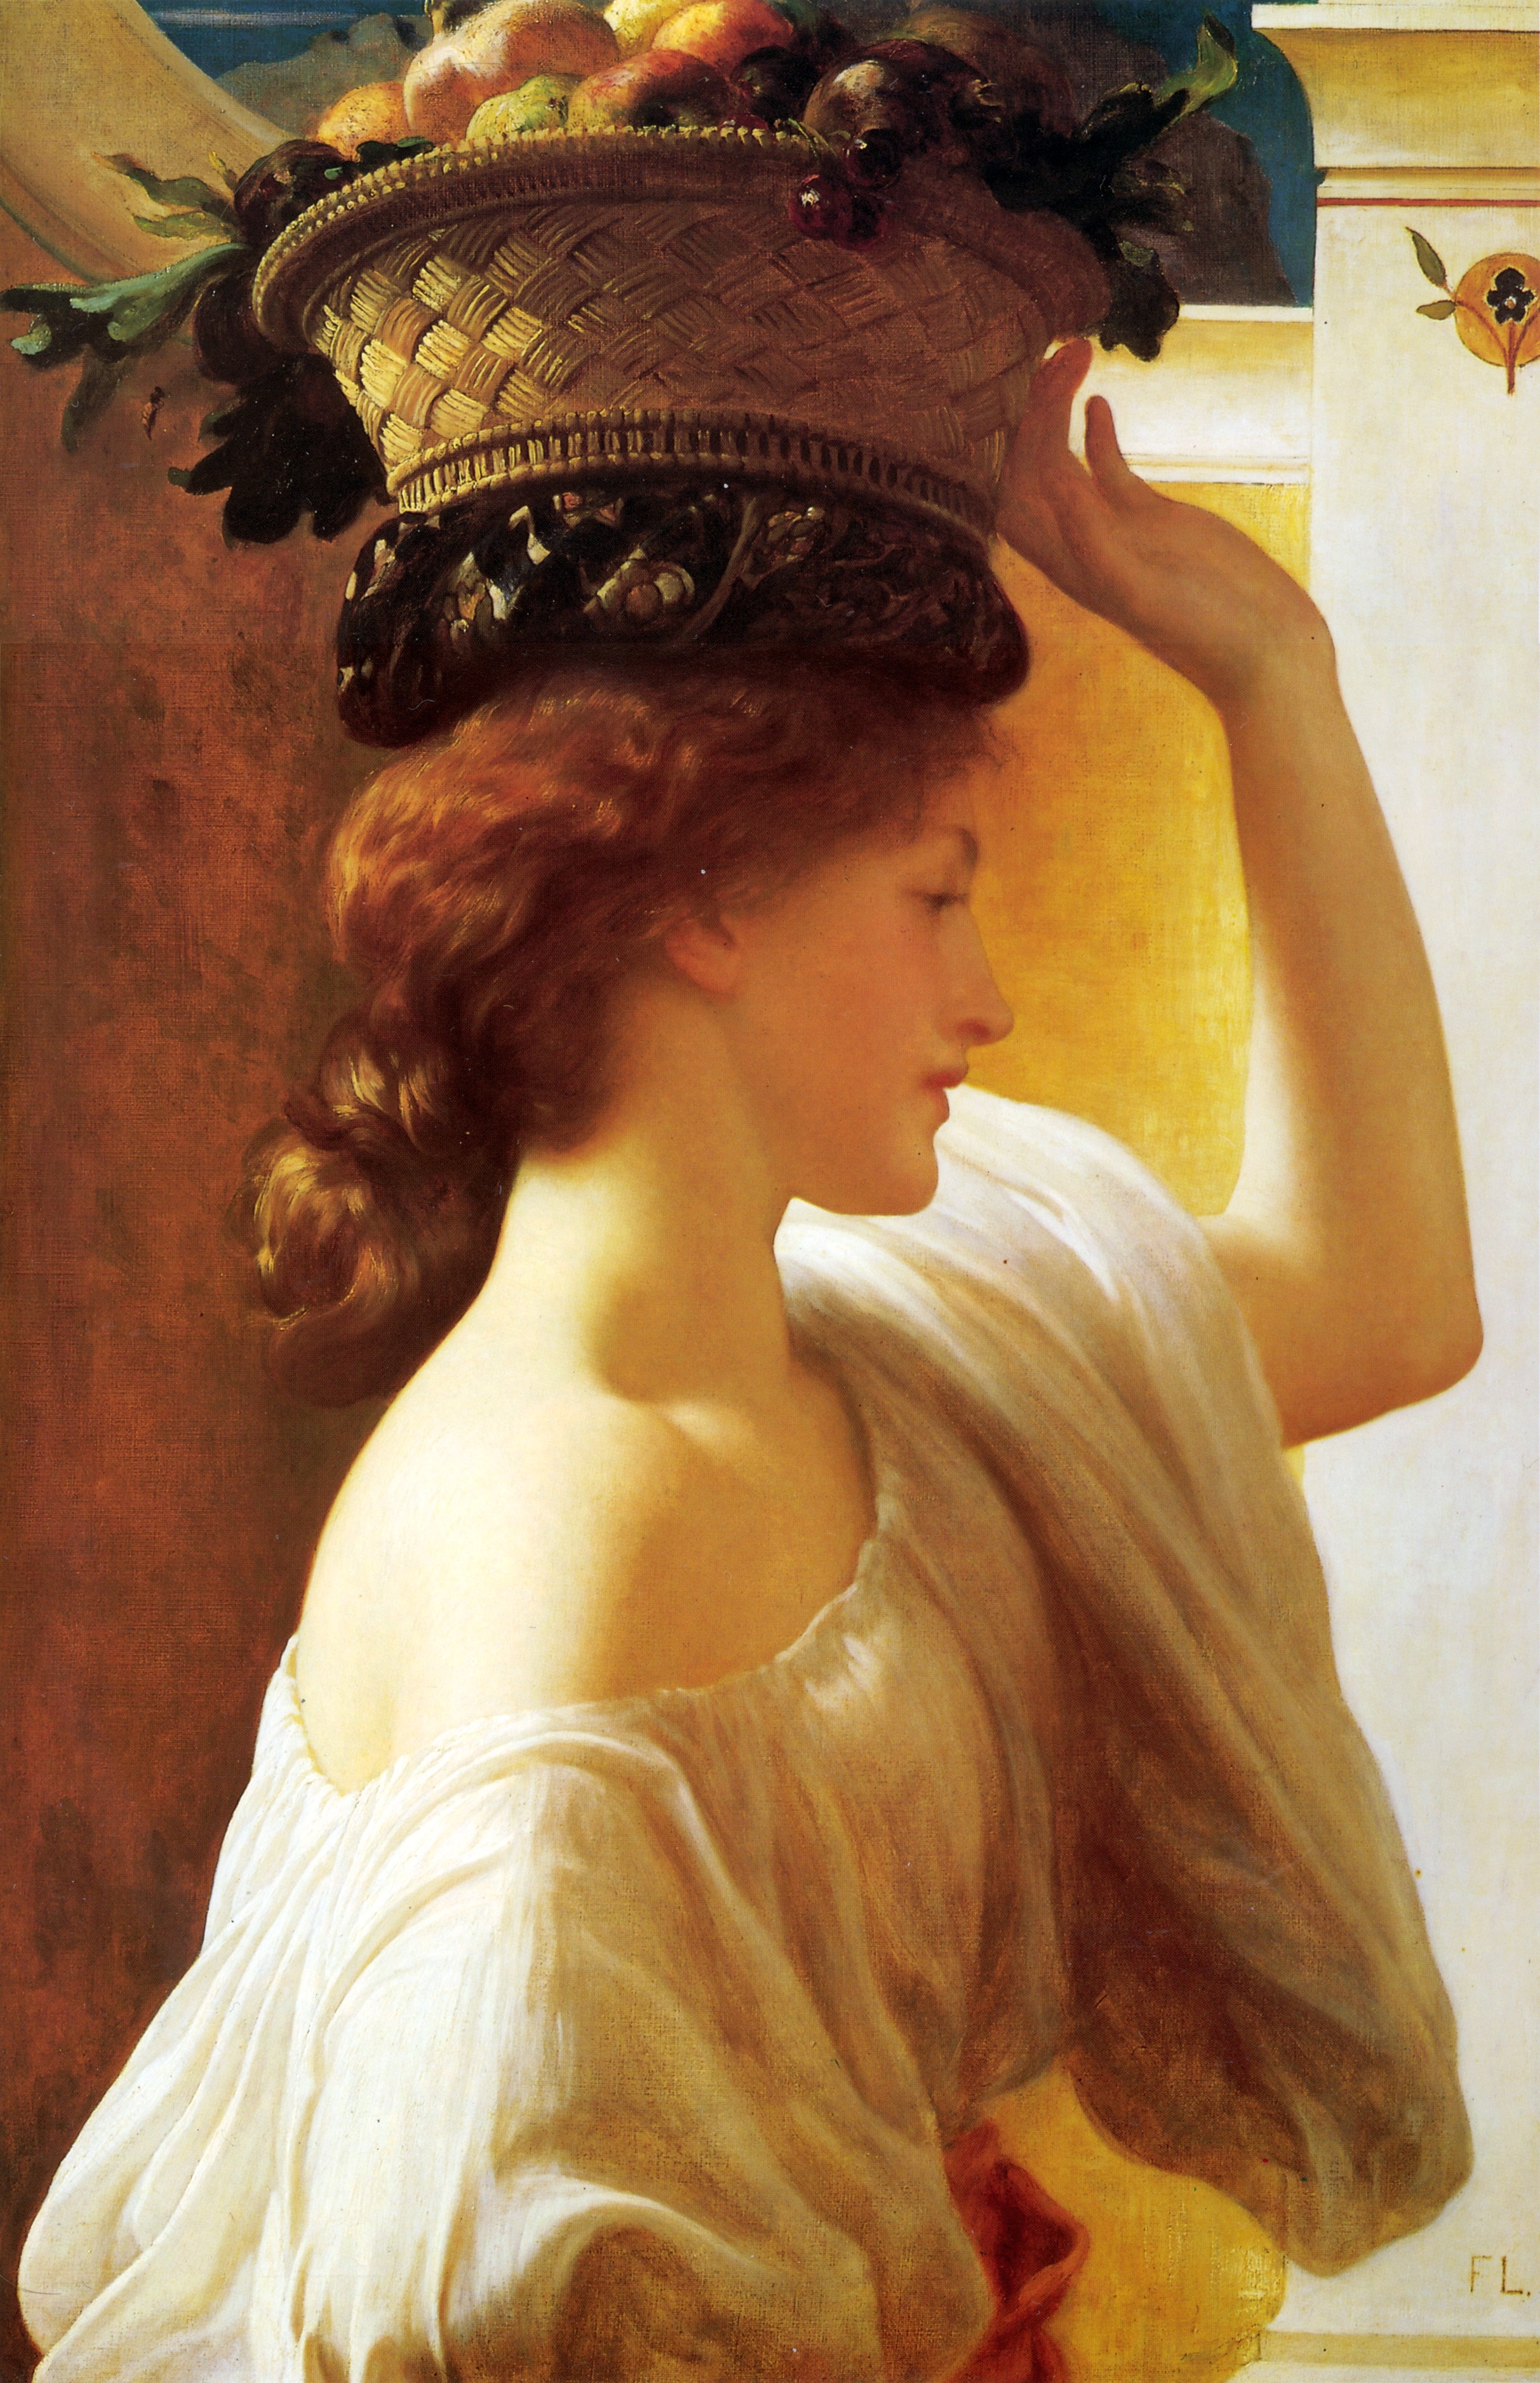 "Girl with a Basket of Fruit" by Frederic Leighton -Public domain